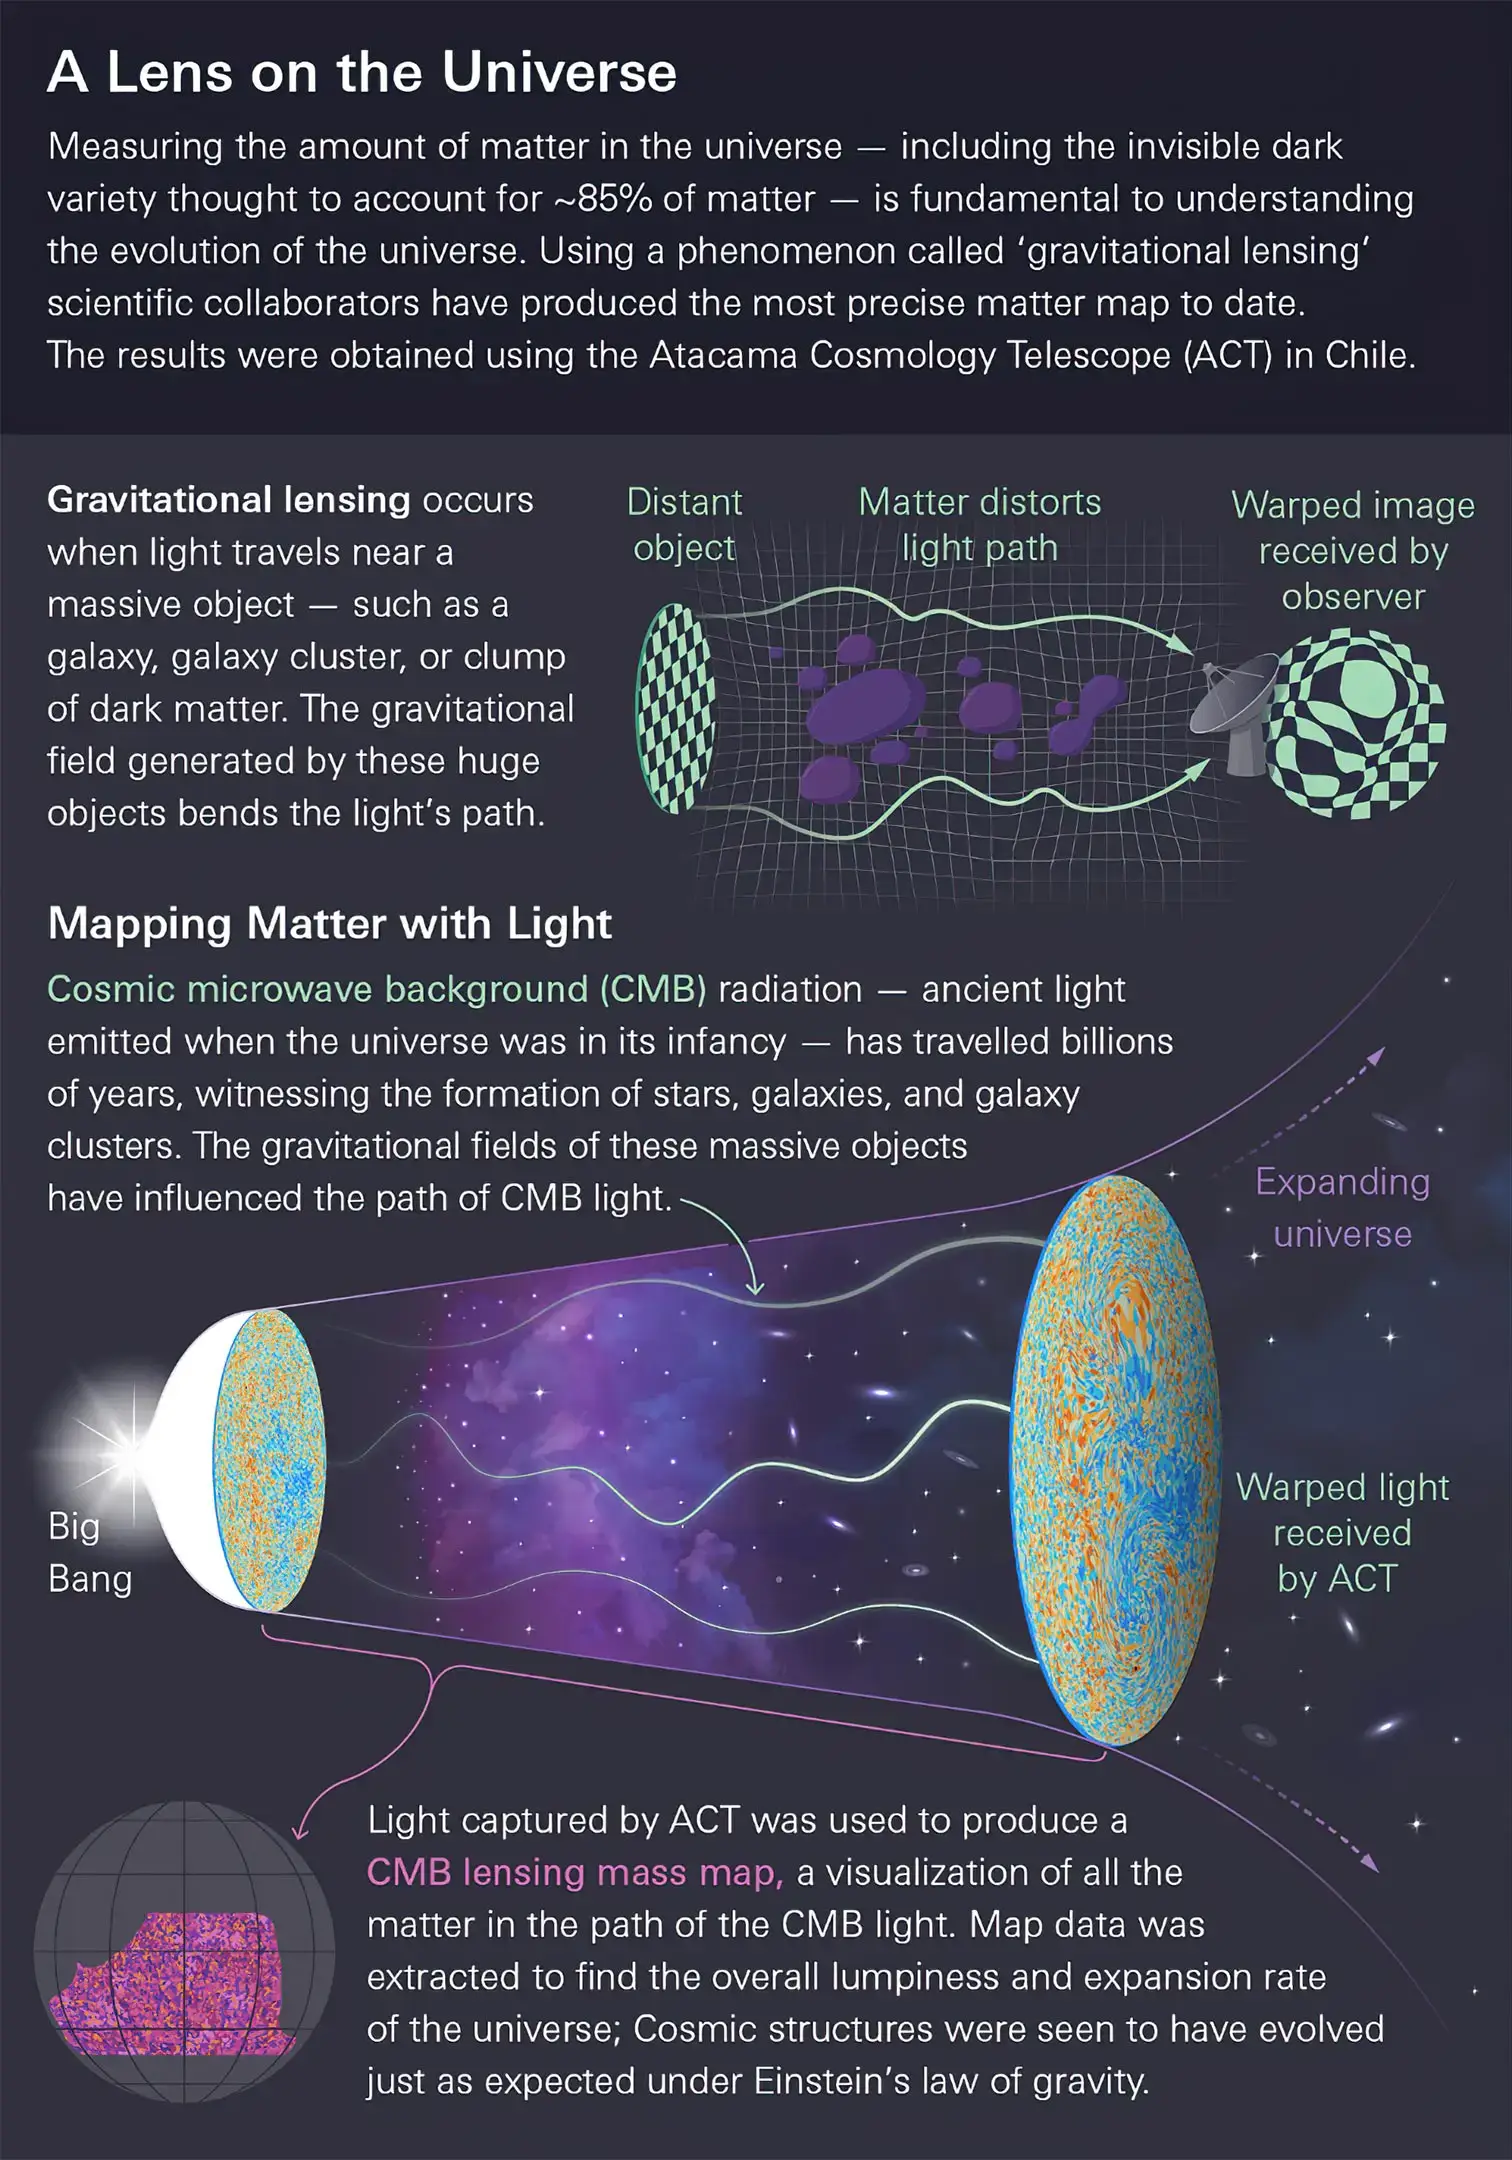 The universe according to ACT dark matter observations. Illustration: Lucy Reading-Ikkanda, Simons Foundation